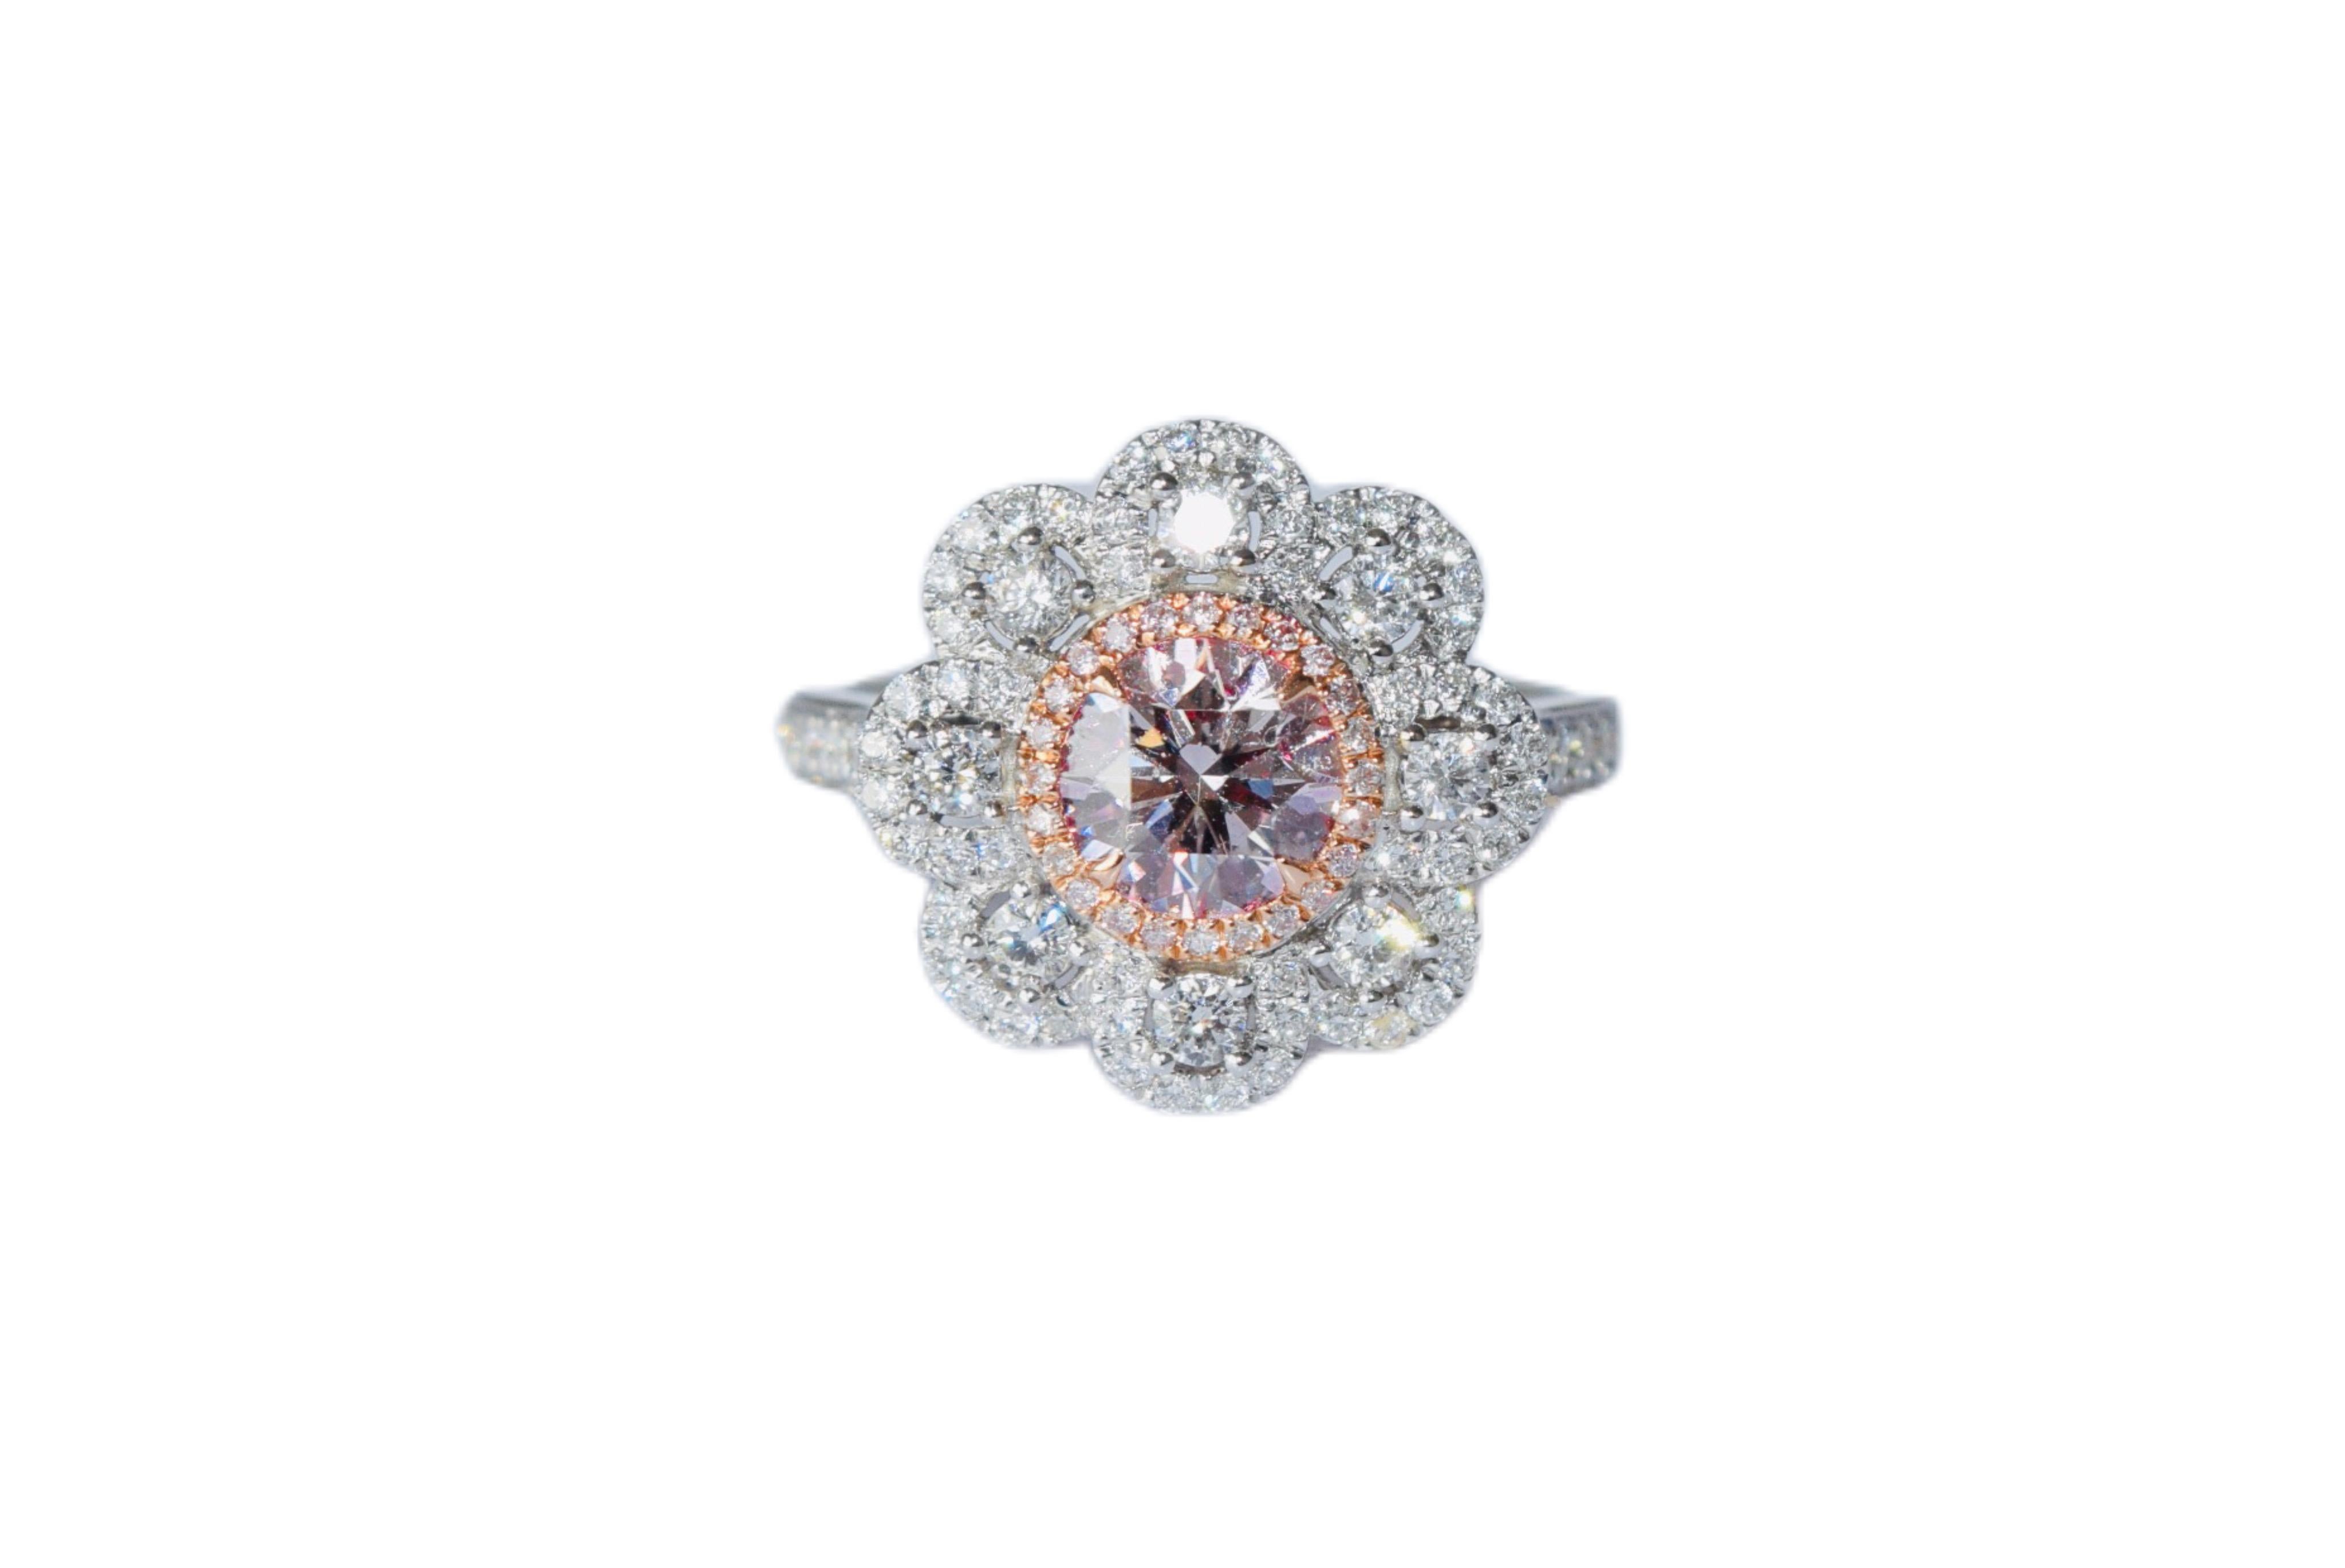 0.92 Carat Very Light Pink Diamond Ring VS2 Clarity GIA Certified For Sale 5